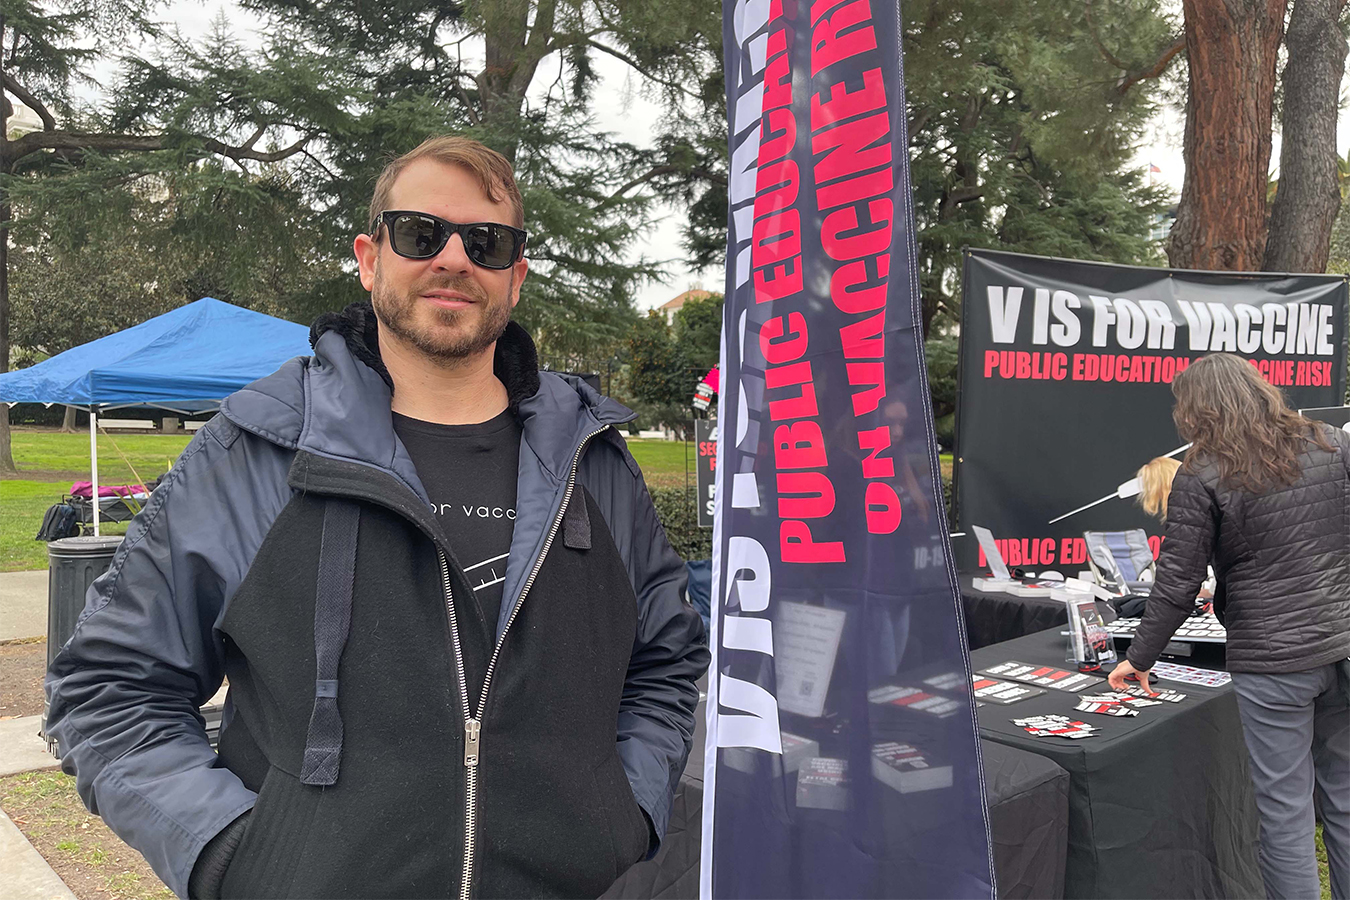 Joshua Coleman, co-founder of the group V Is for Vaccine, stands next to a booth set up at an anti-vaccine rally at the California Capitol in early January.